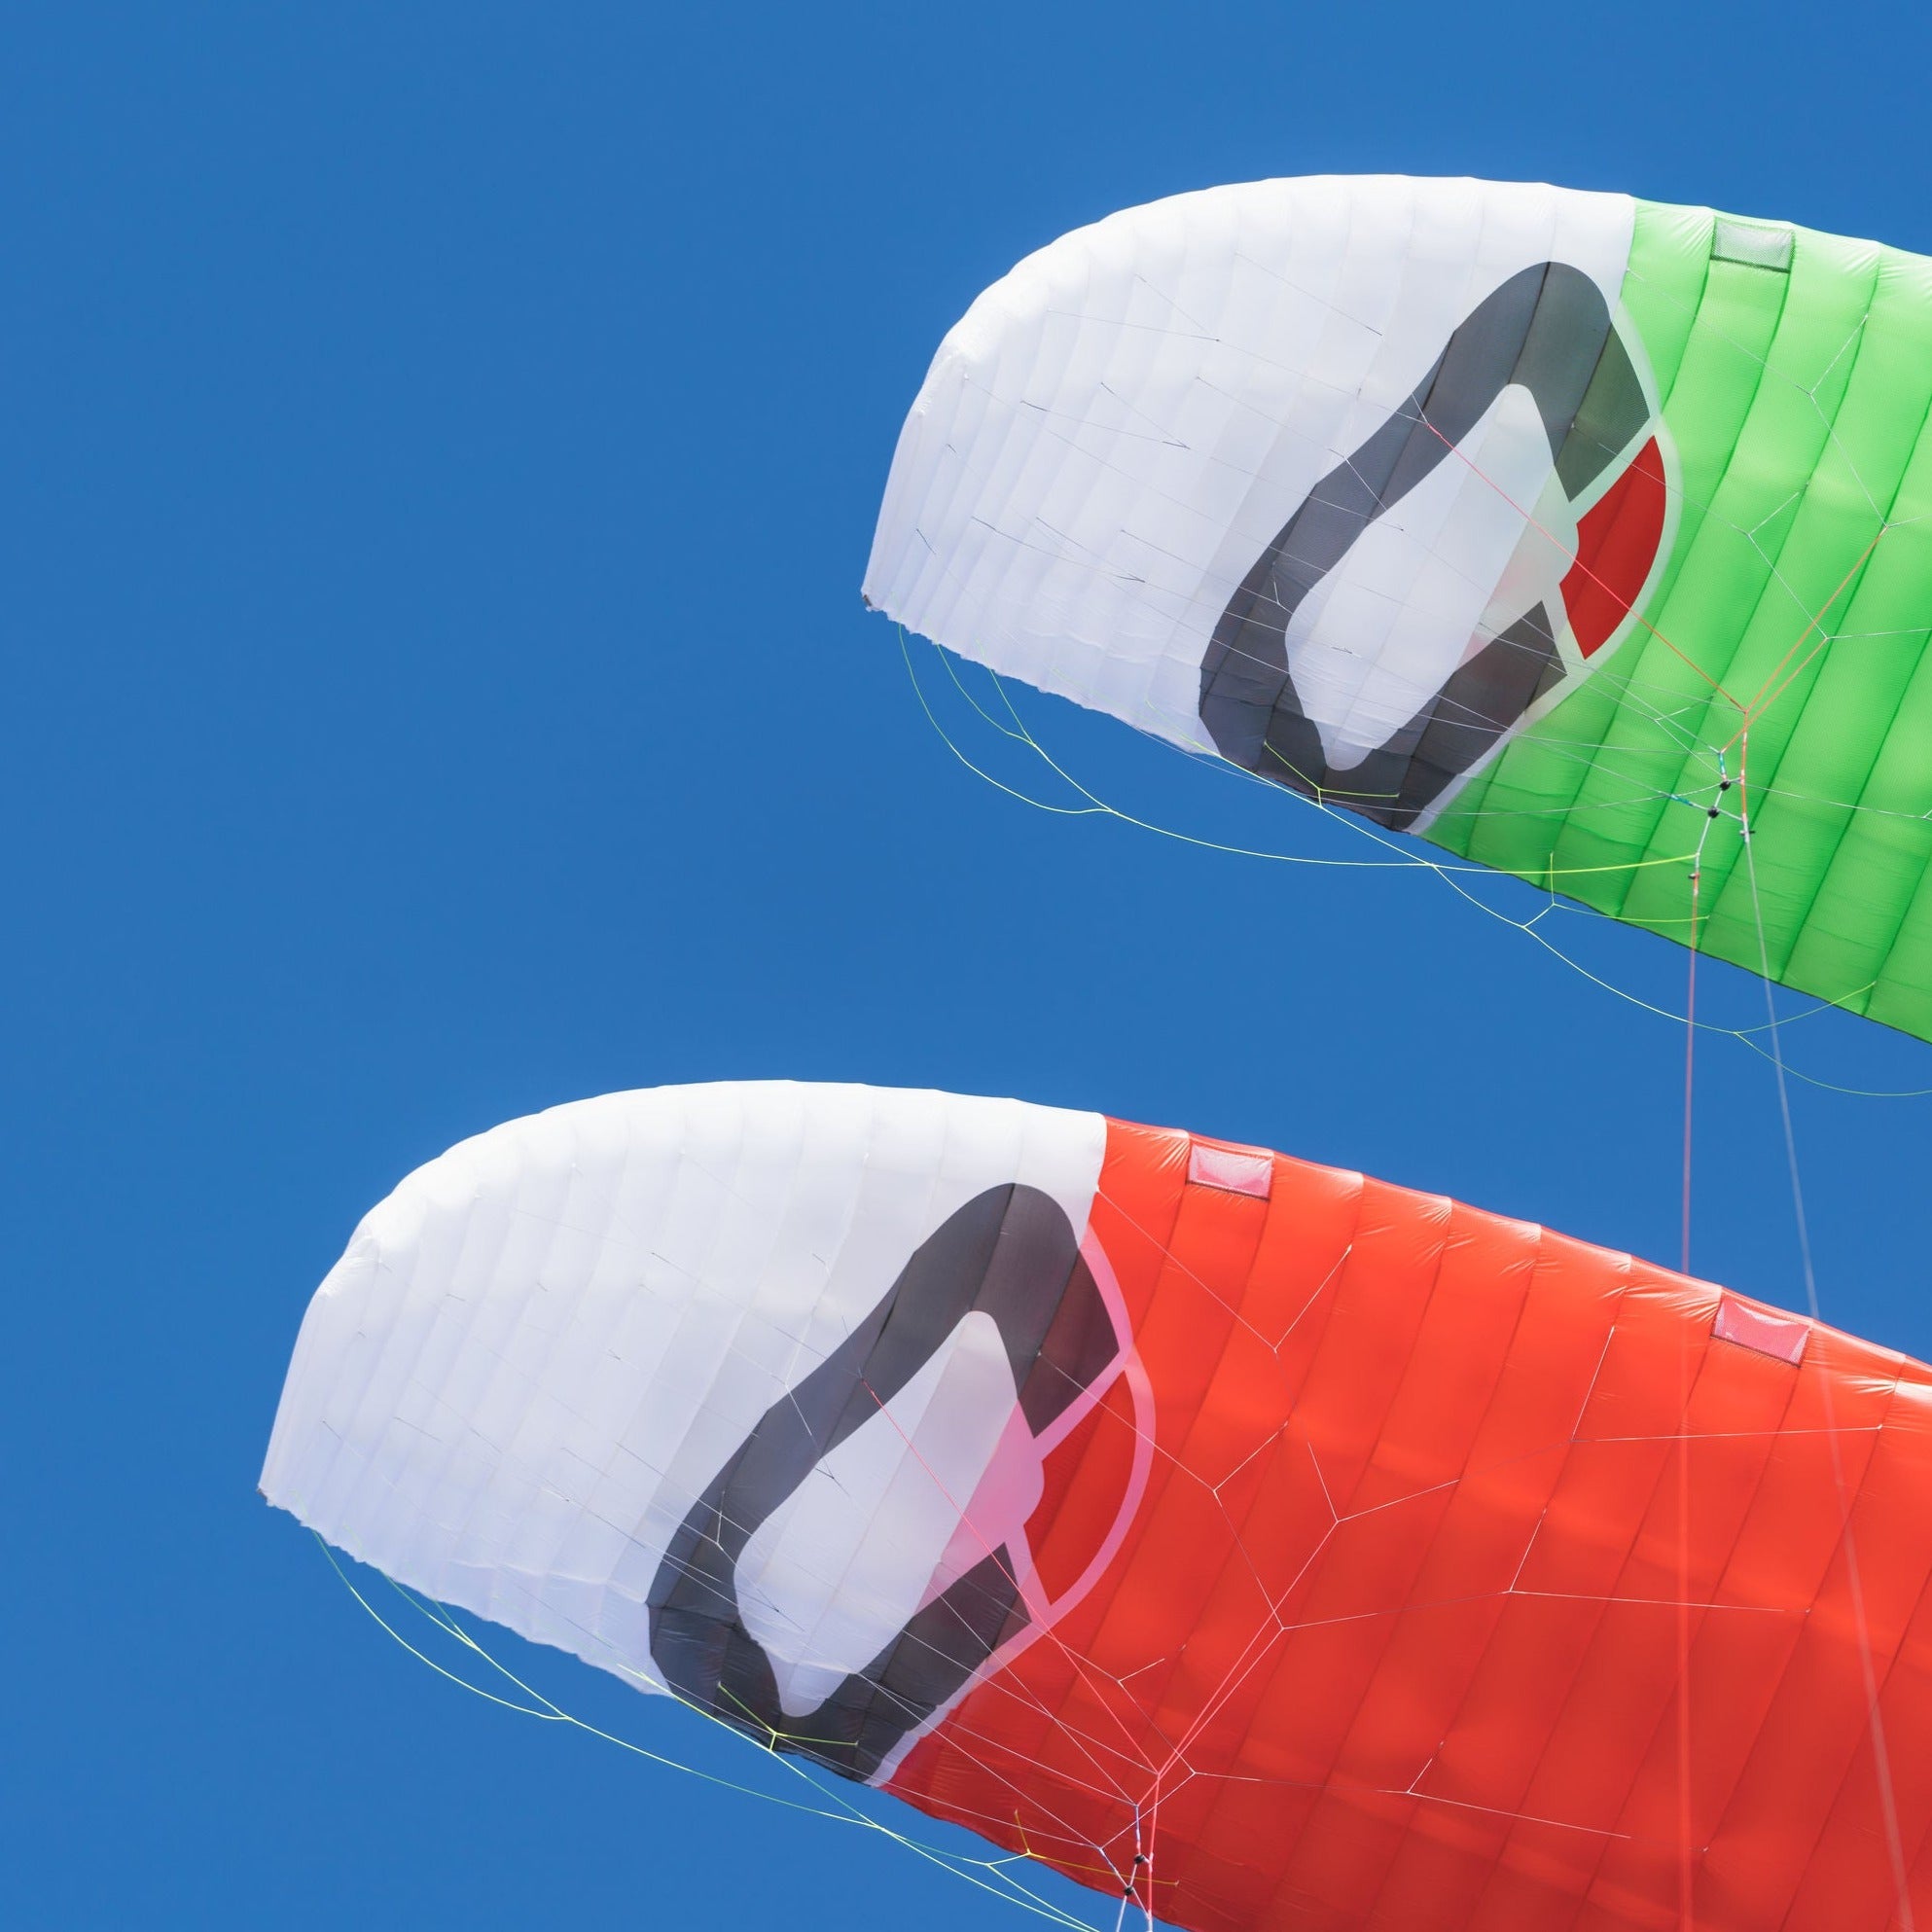 Two Ozone Chrono V4&#39;s flying. One green and one Red